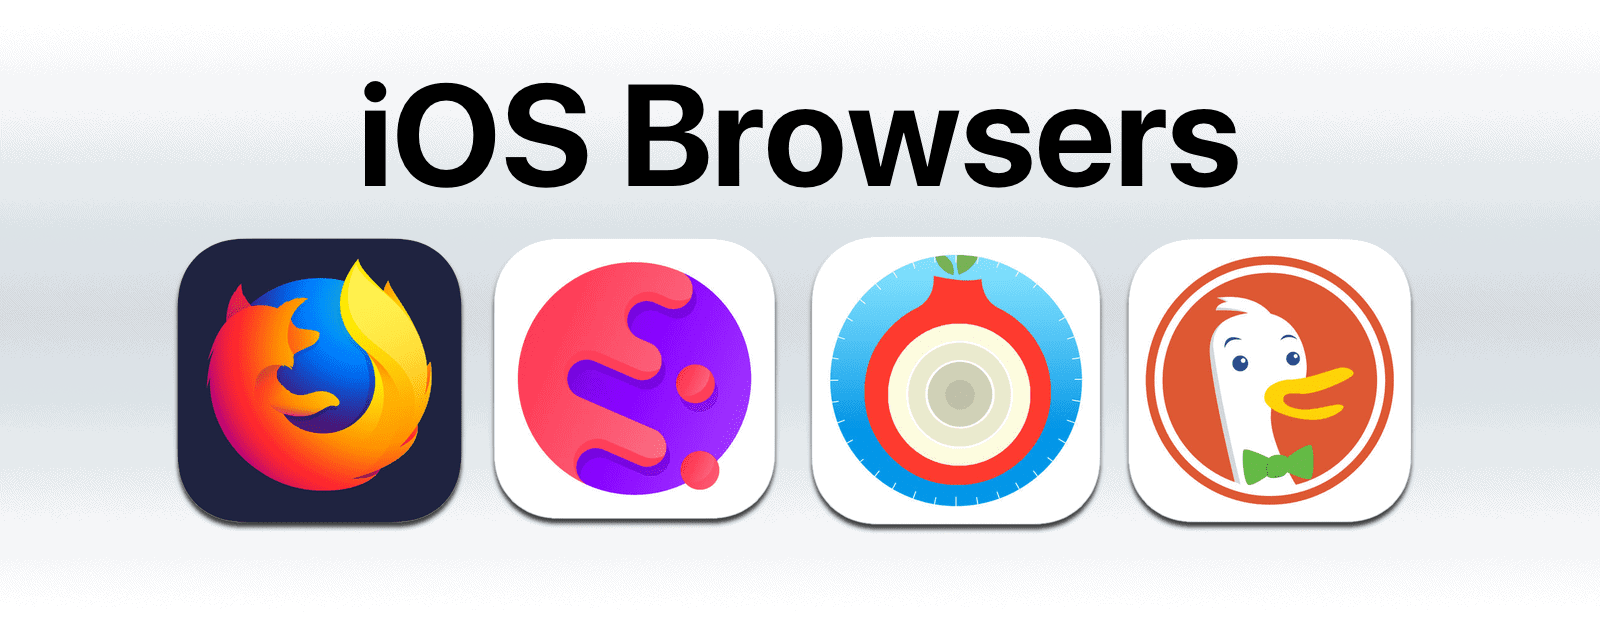 4 iOS Browsers To Use As An Alternative to Safari